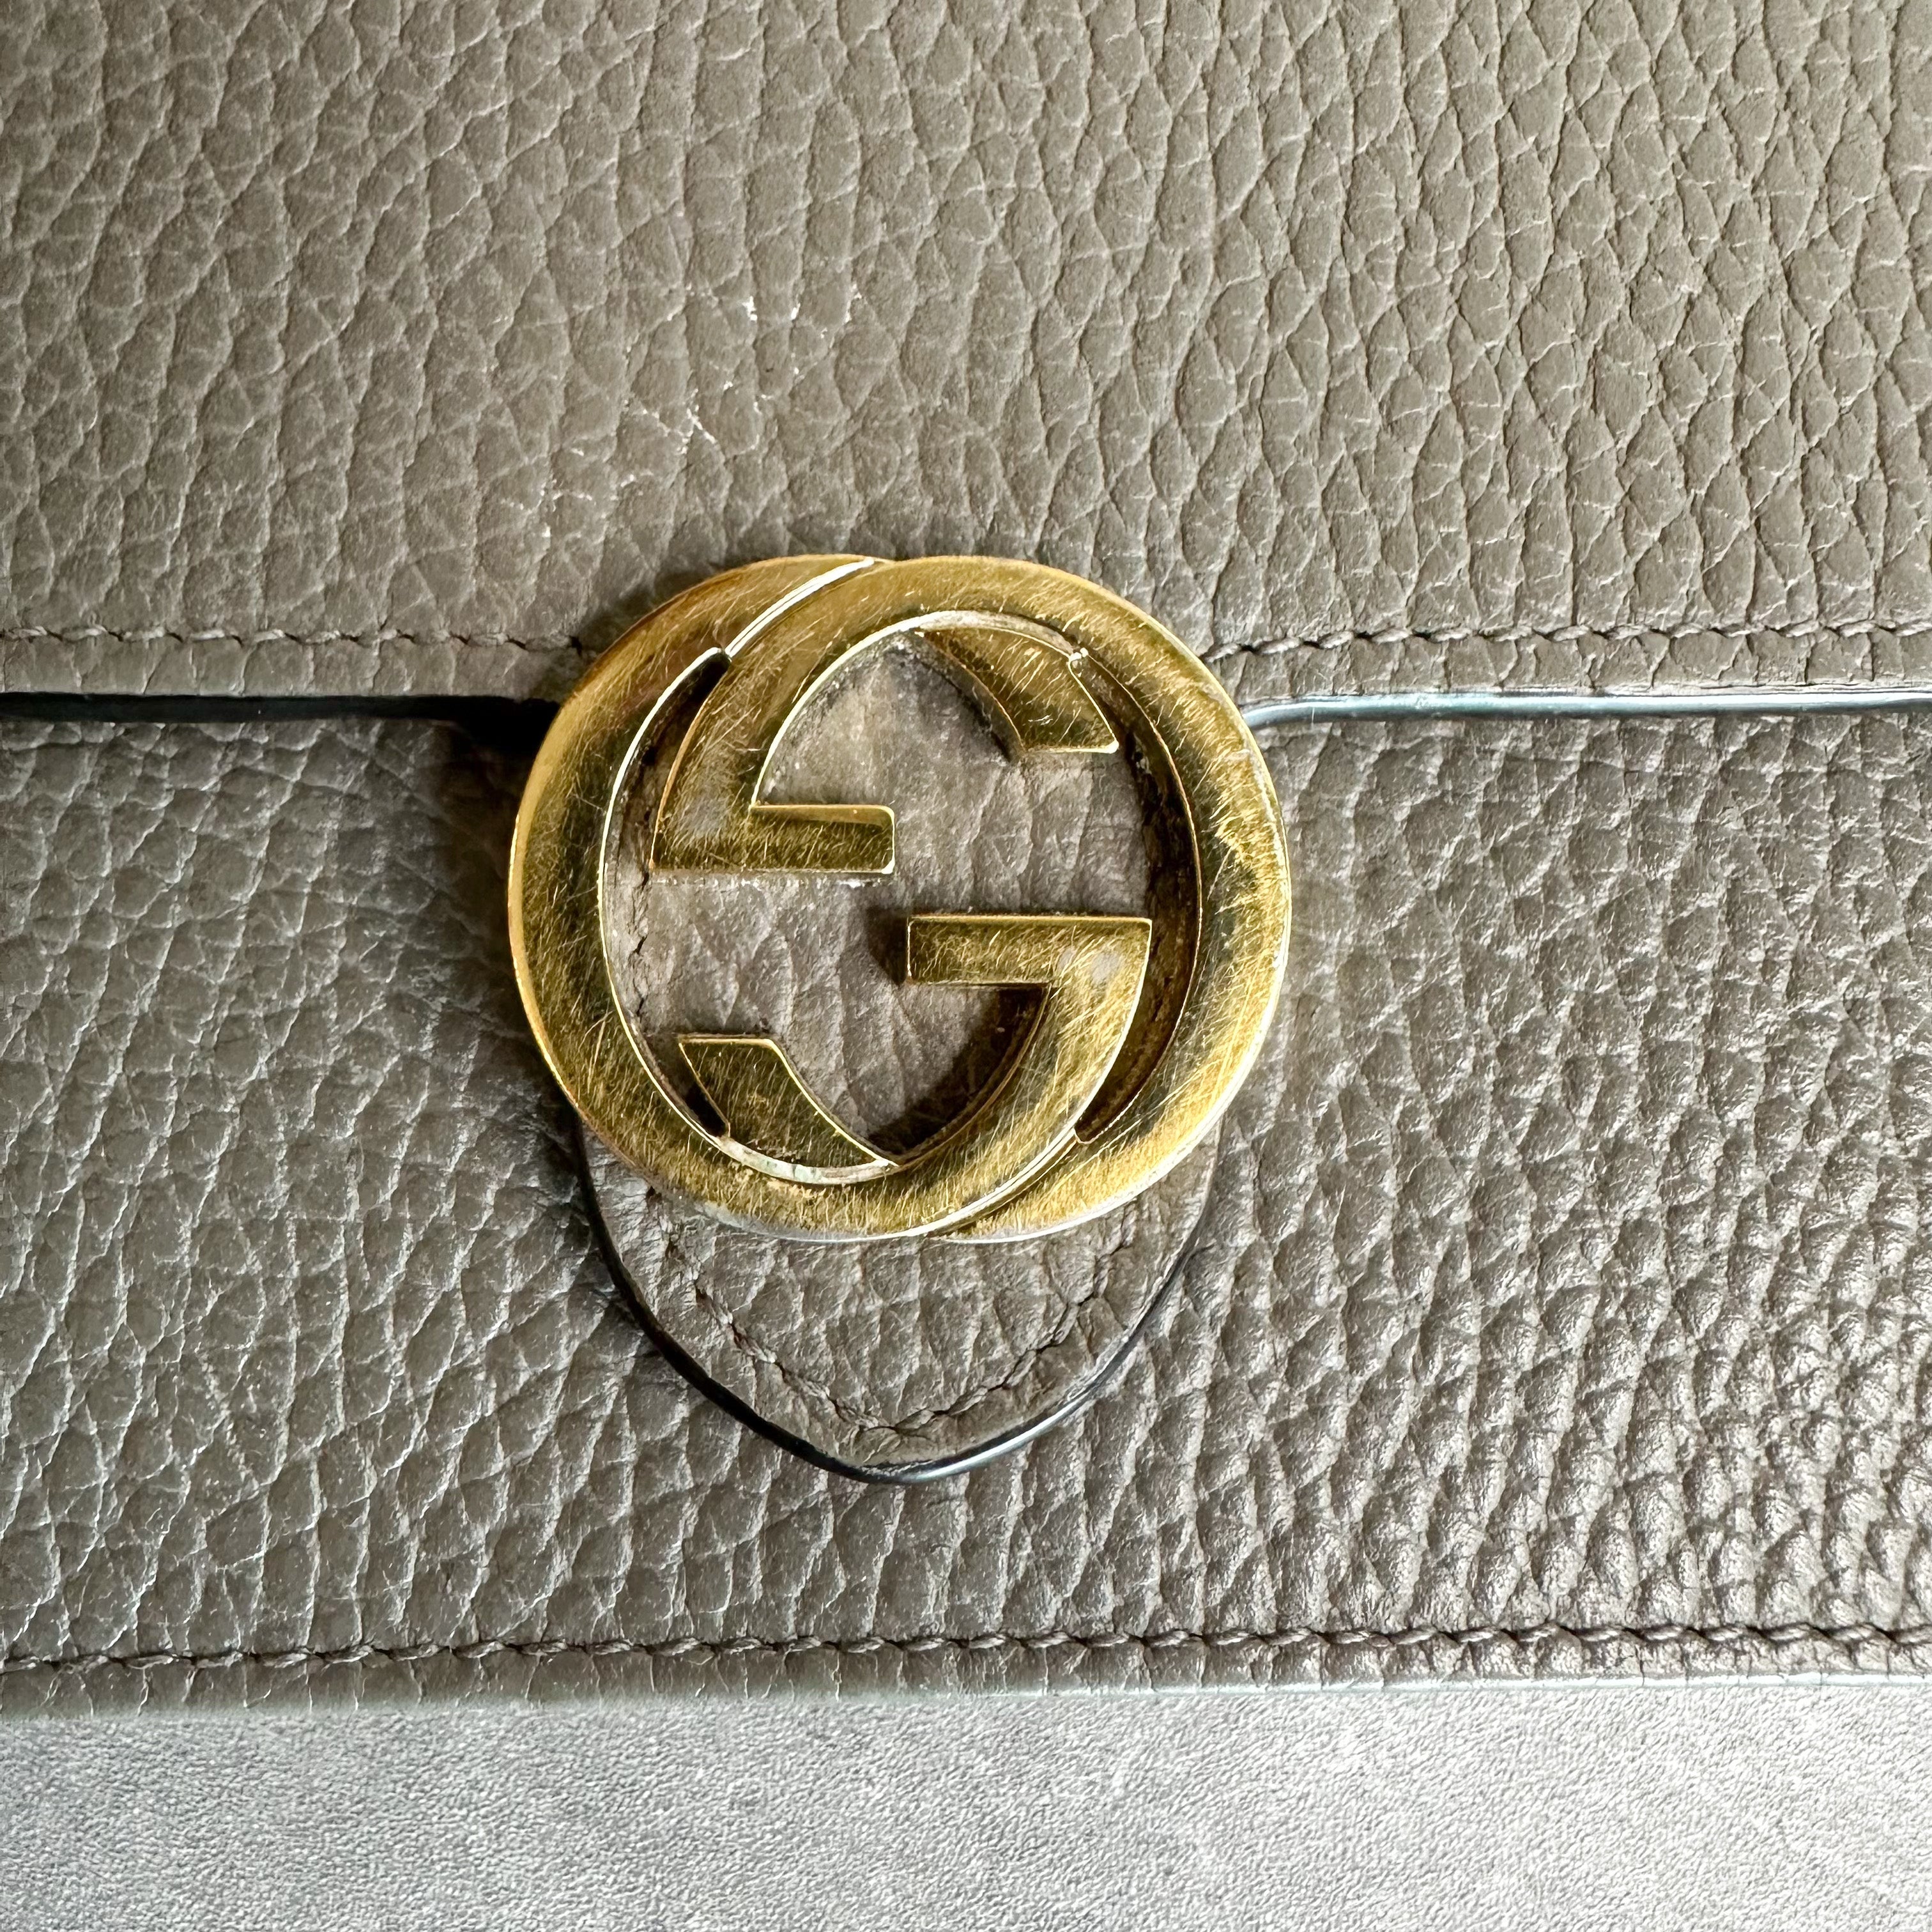 Gucci Wallet On Chain Interlocking Calfskin Leather In Ivory for Sale